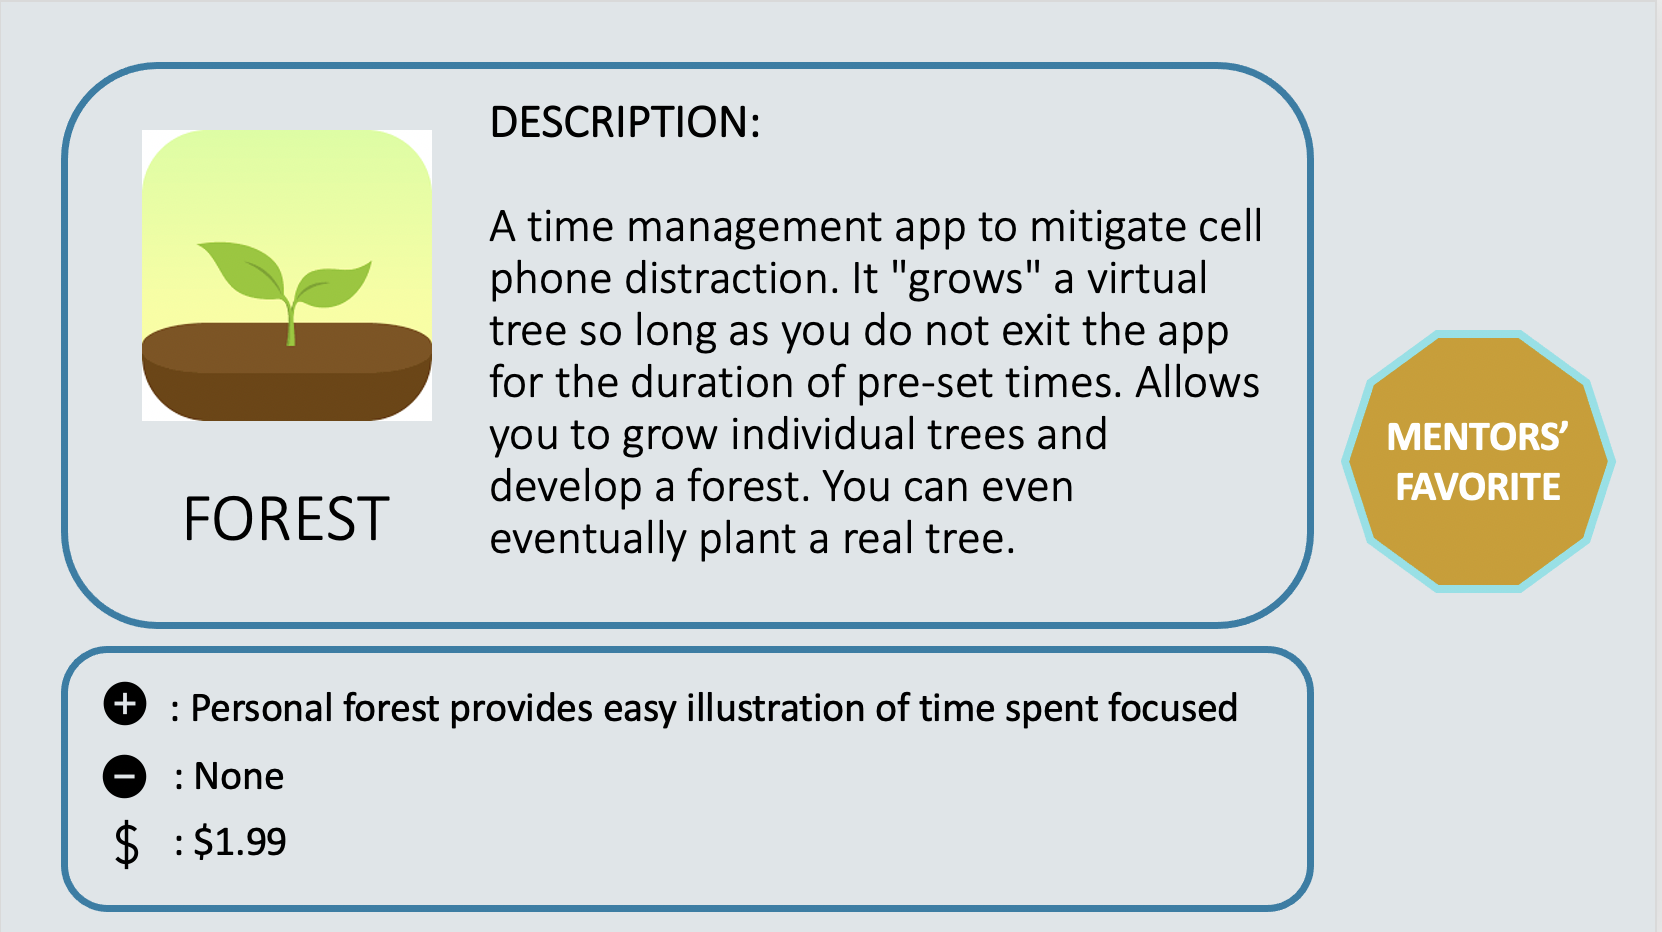 FOREST – Mentor’s Favorite - A time management app to mitigate cell phone distraction. It "grows" a virtual tree so long as you do not exit the app for the duration of pre-set times. Allows you to grow individual trees and develop a forest. You can even eventually plant a real tree. Positive: Personal forest provides easy illustration of time spent focused. Negative: None. Cost: $1.99.